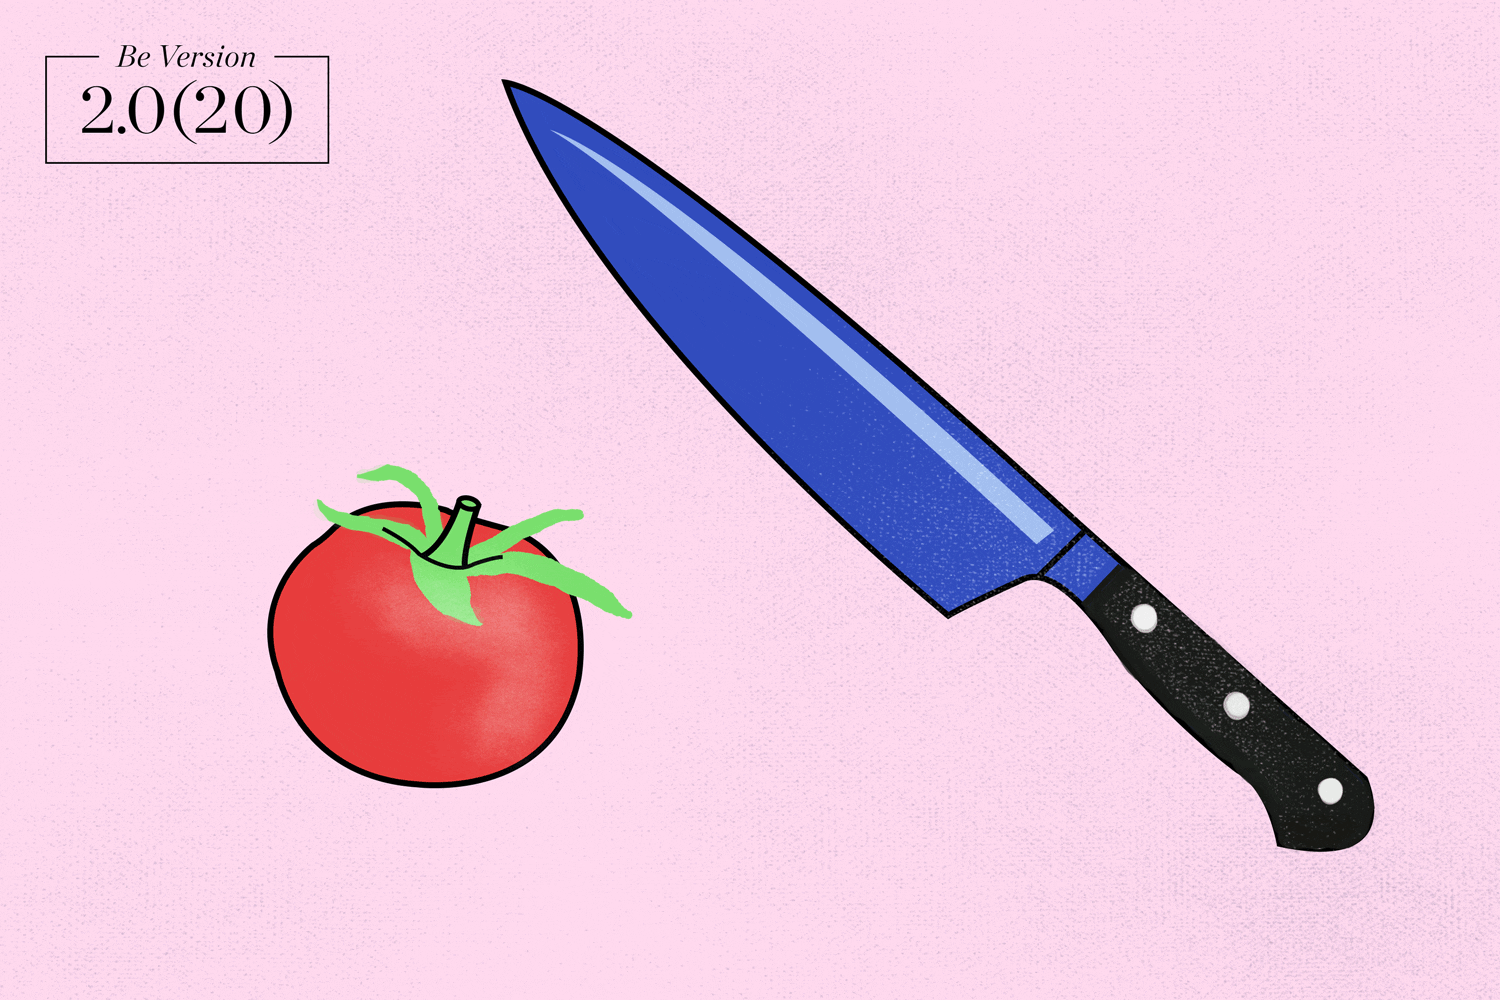 An animated illustration of a tomato and a knife.